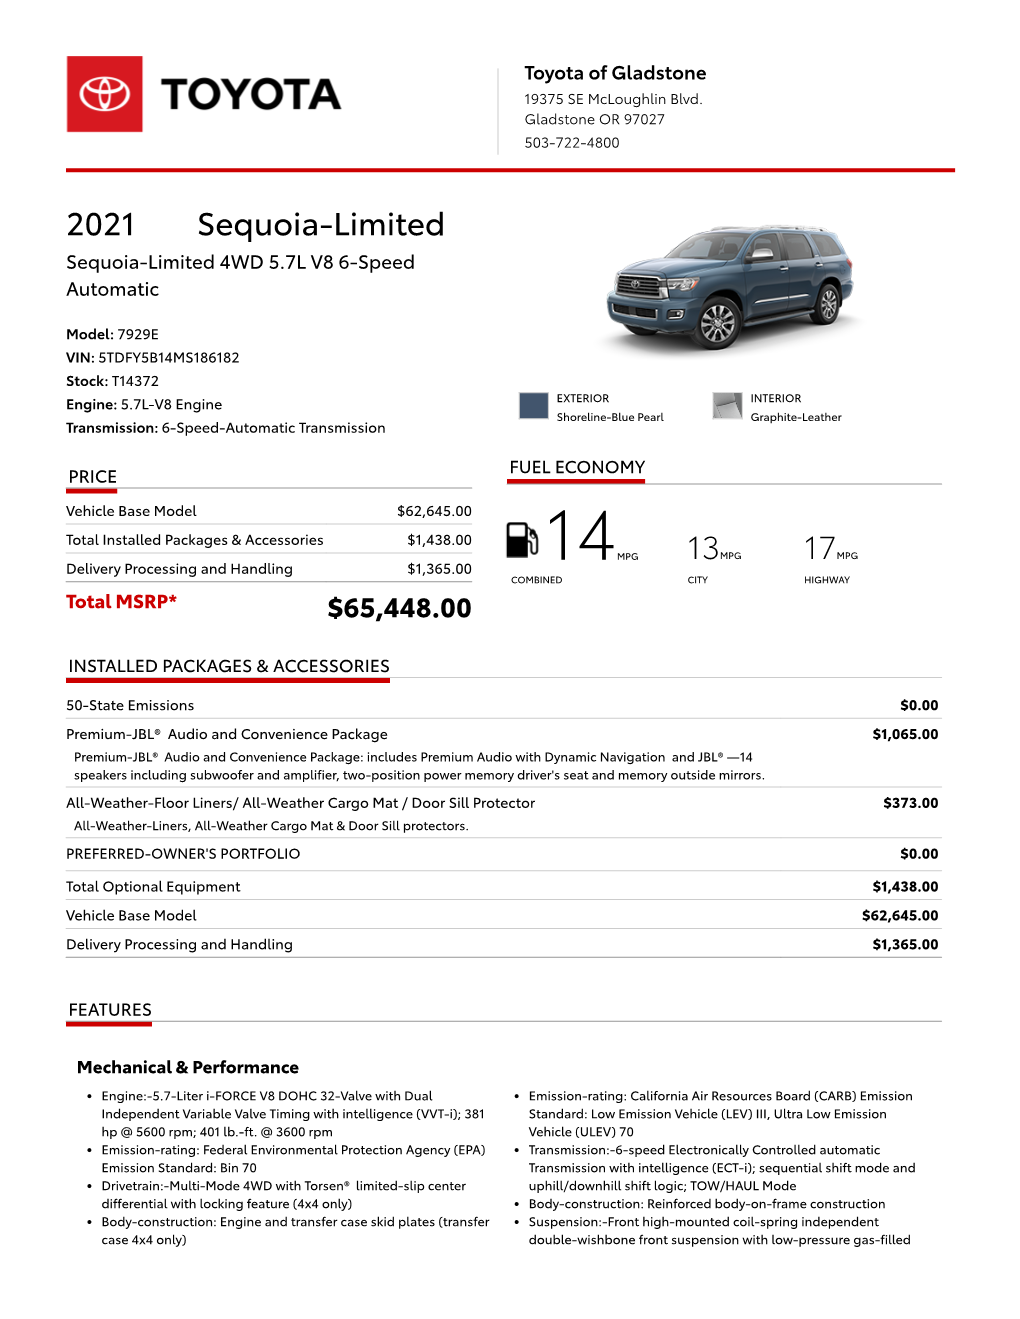 2021 Sequoia-Limited Sequoia-Limited 4WD 5.7L V8 6-Speed Automatic